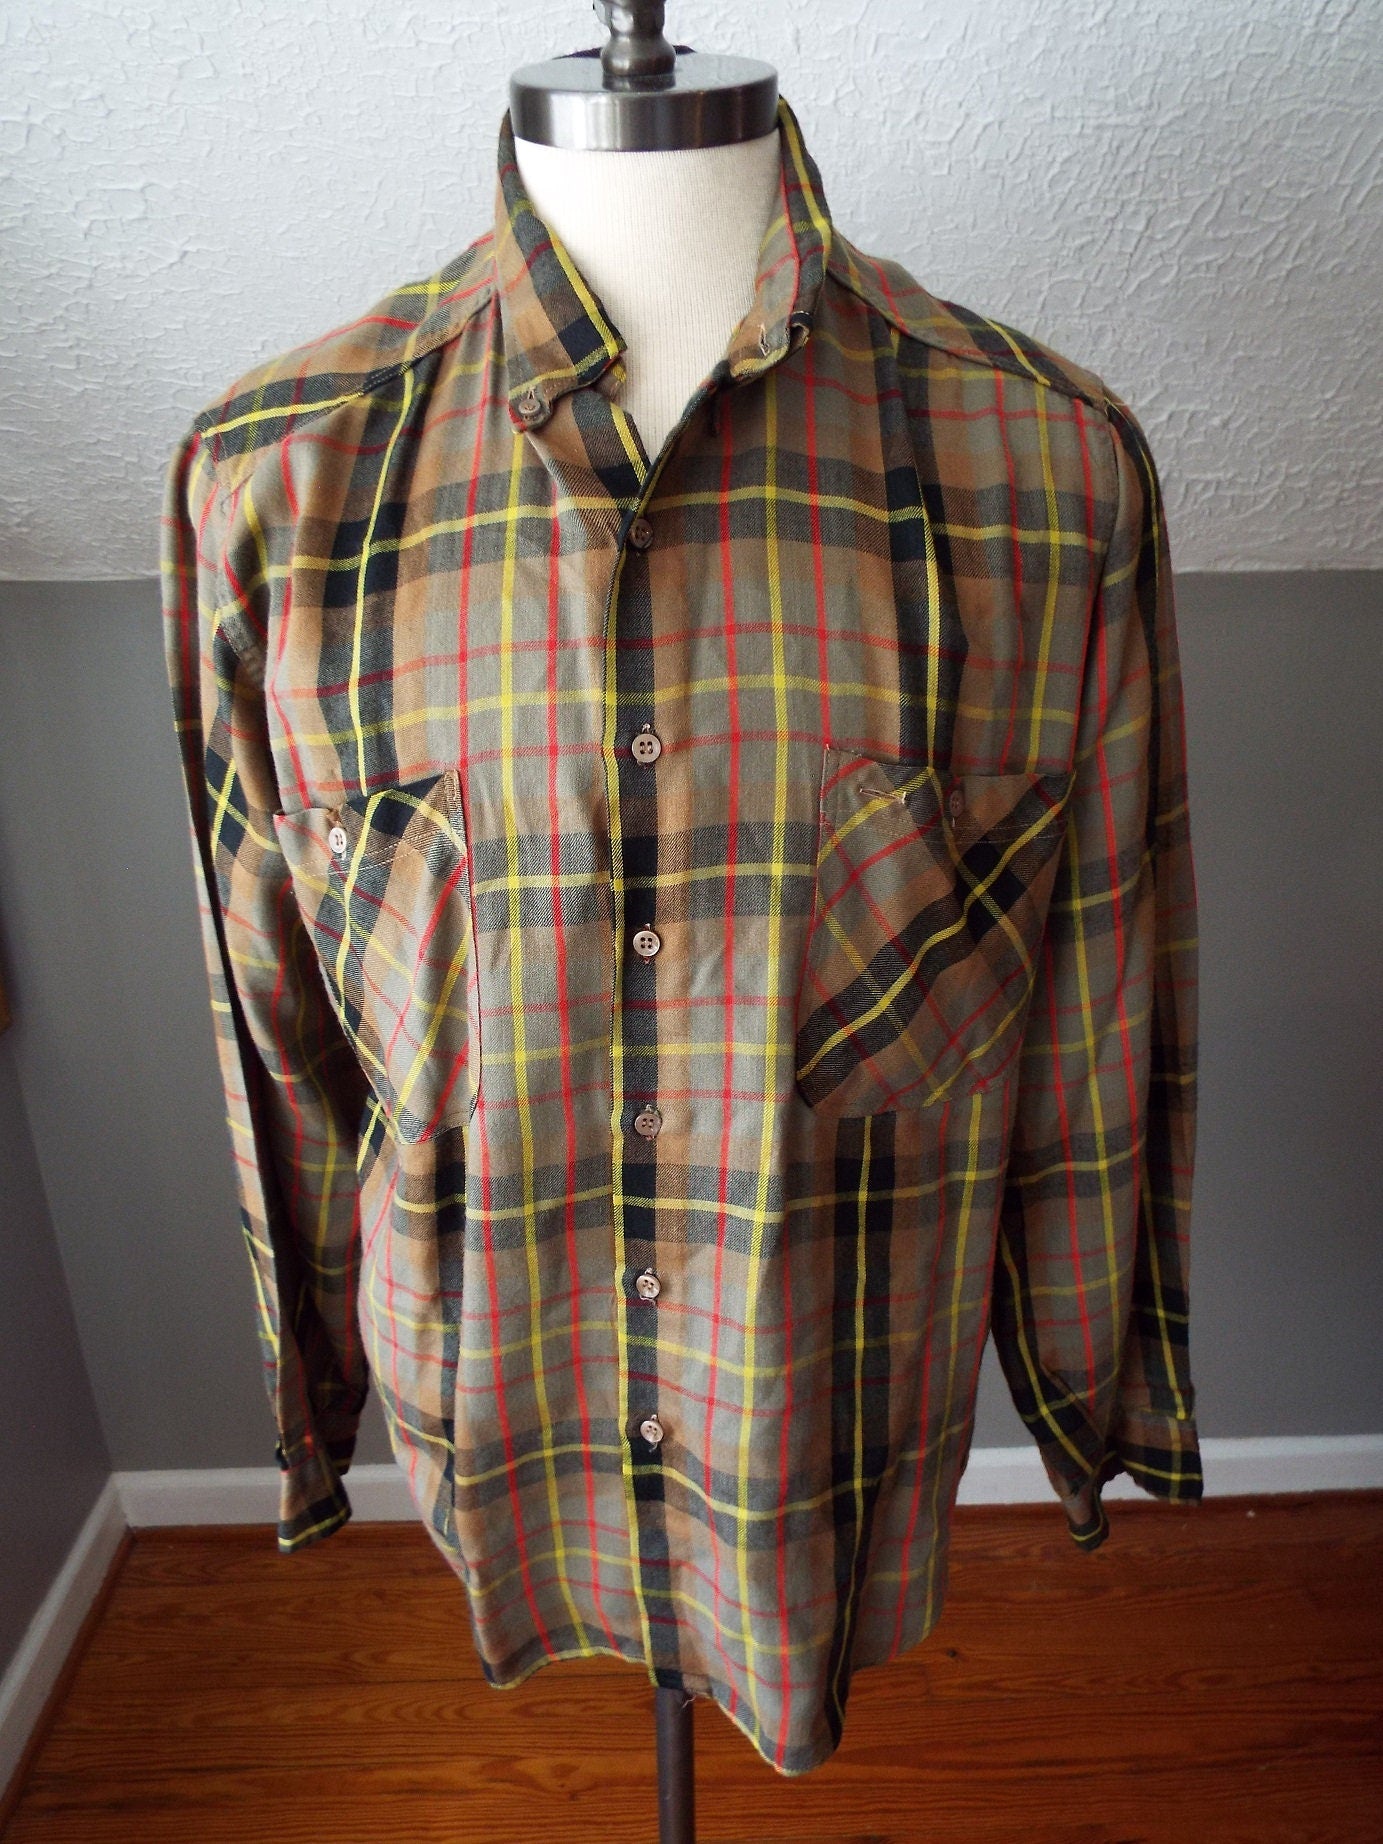 Vintage Long Sleeve Button Down Plaid Shirt by Benetton